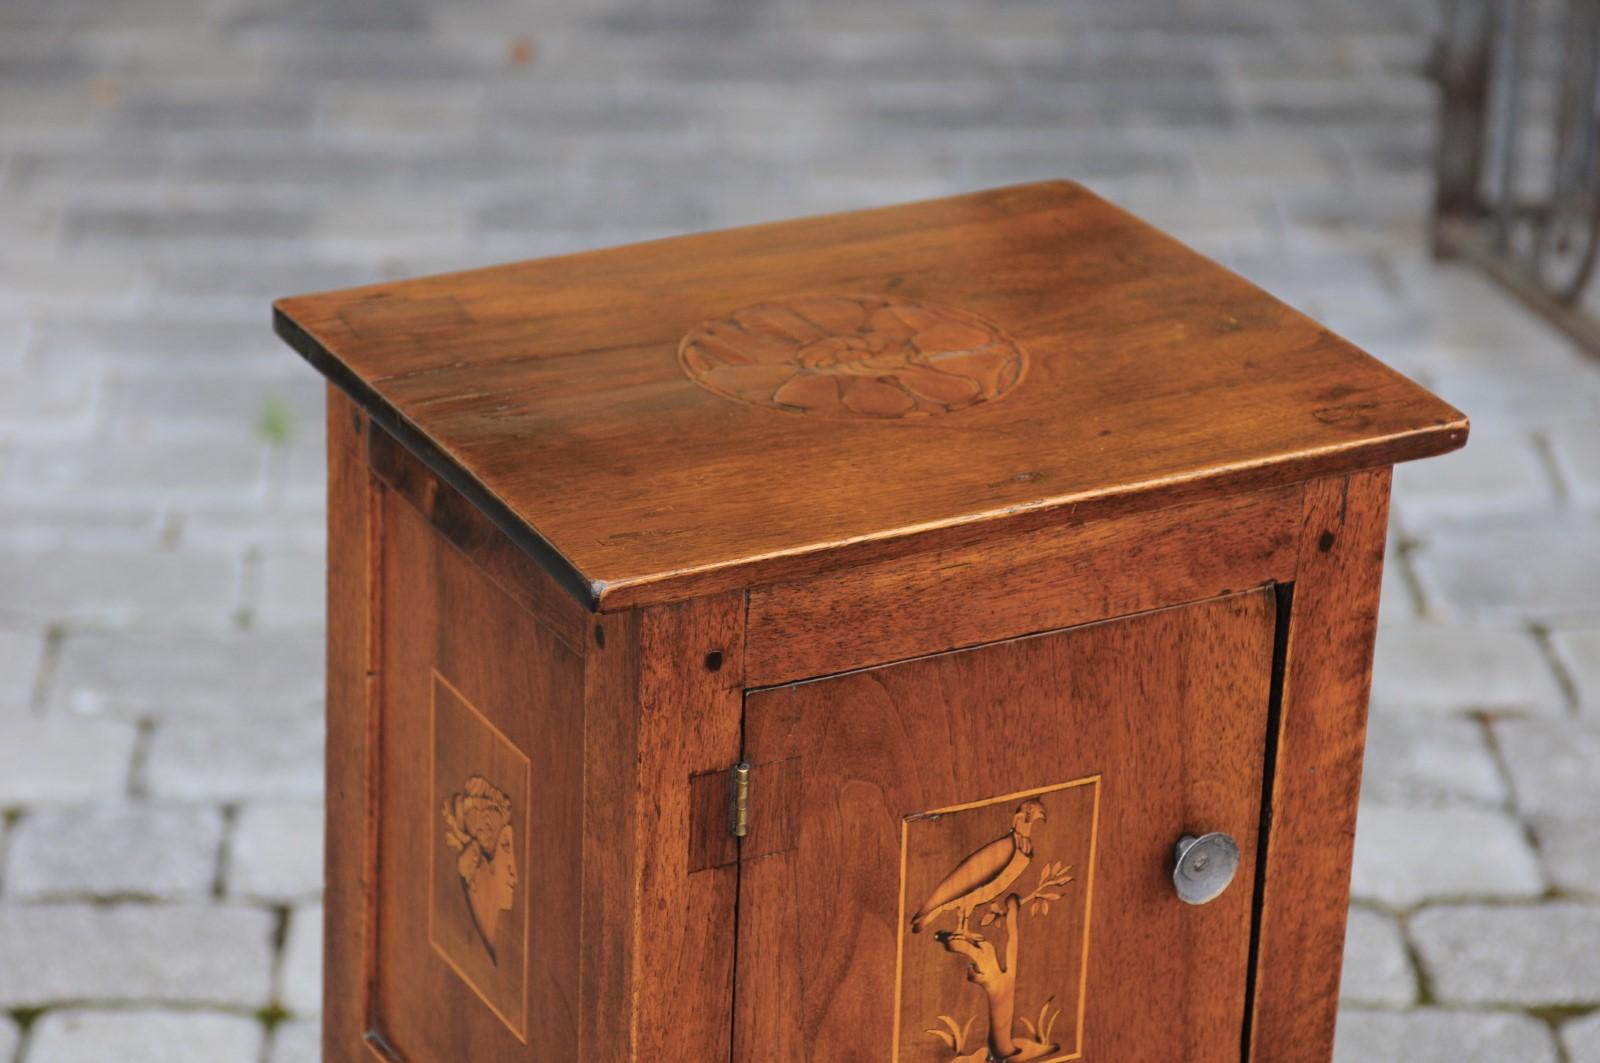 Italian, 1840s Neoclassical Style Walnut Nightstand Cabinet with Marquetry Décor 8